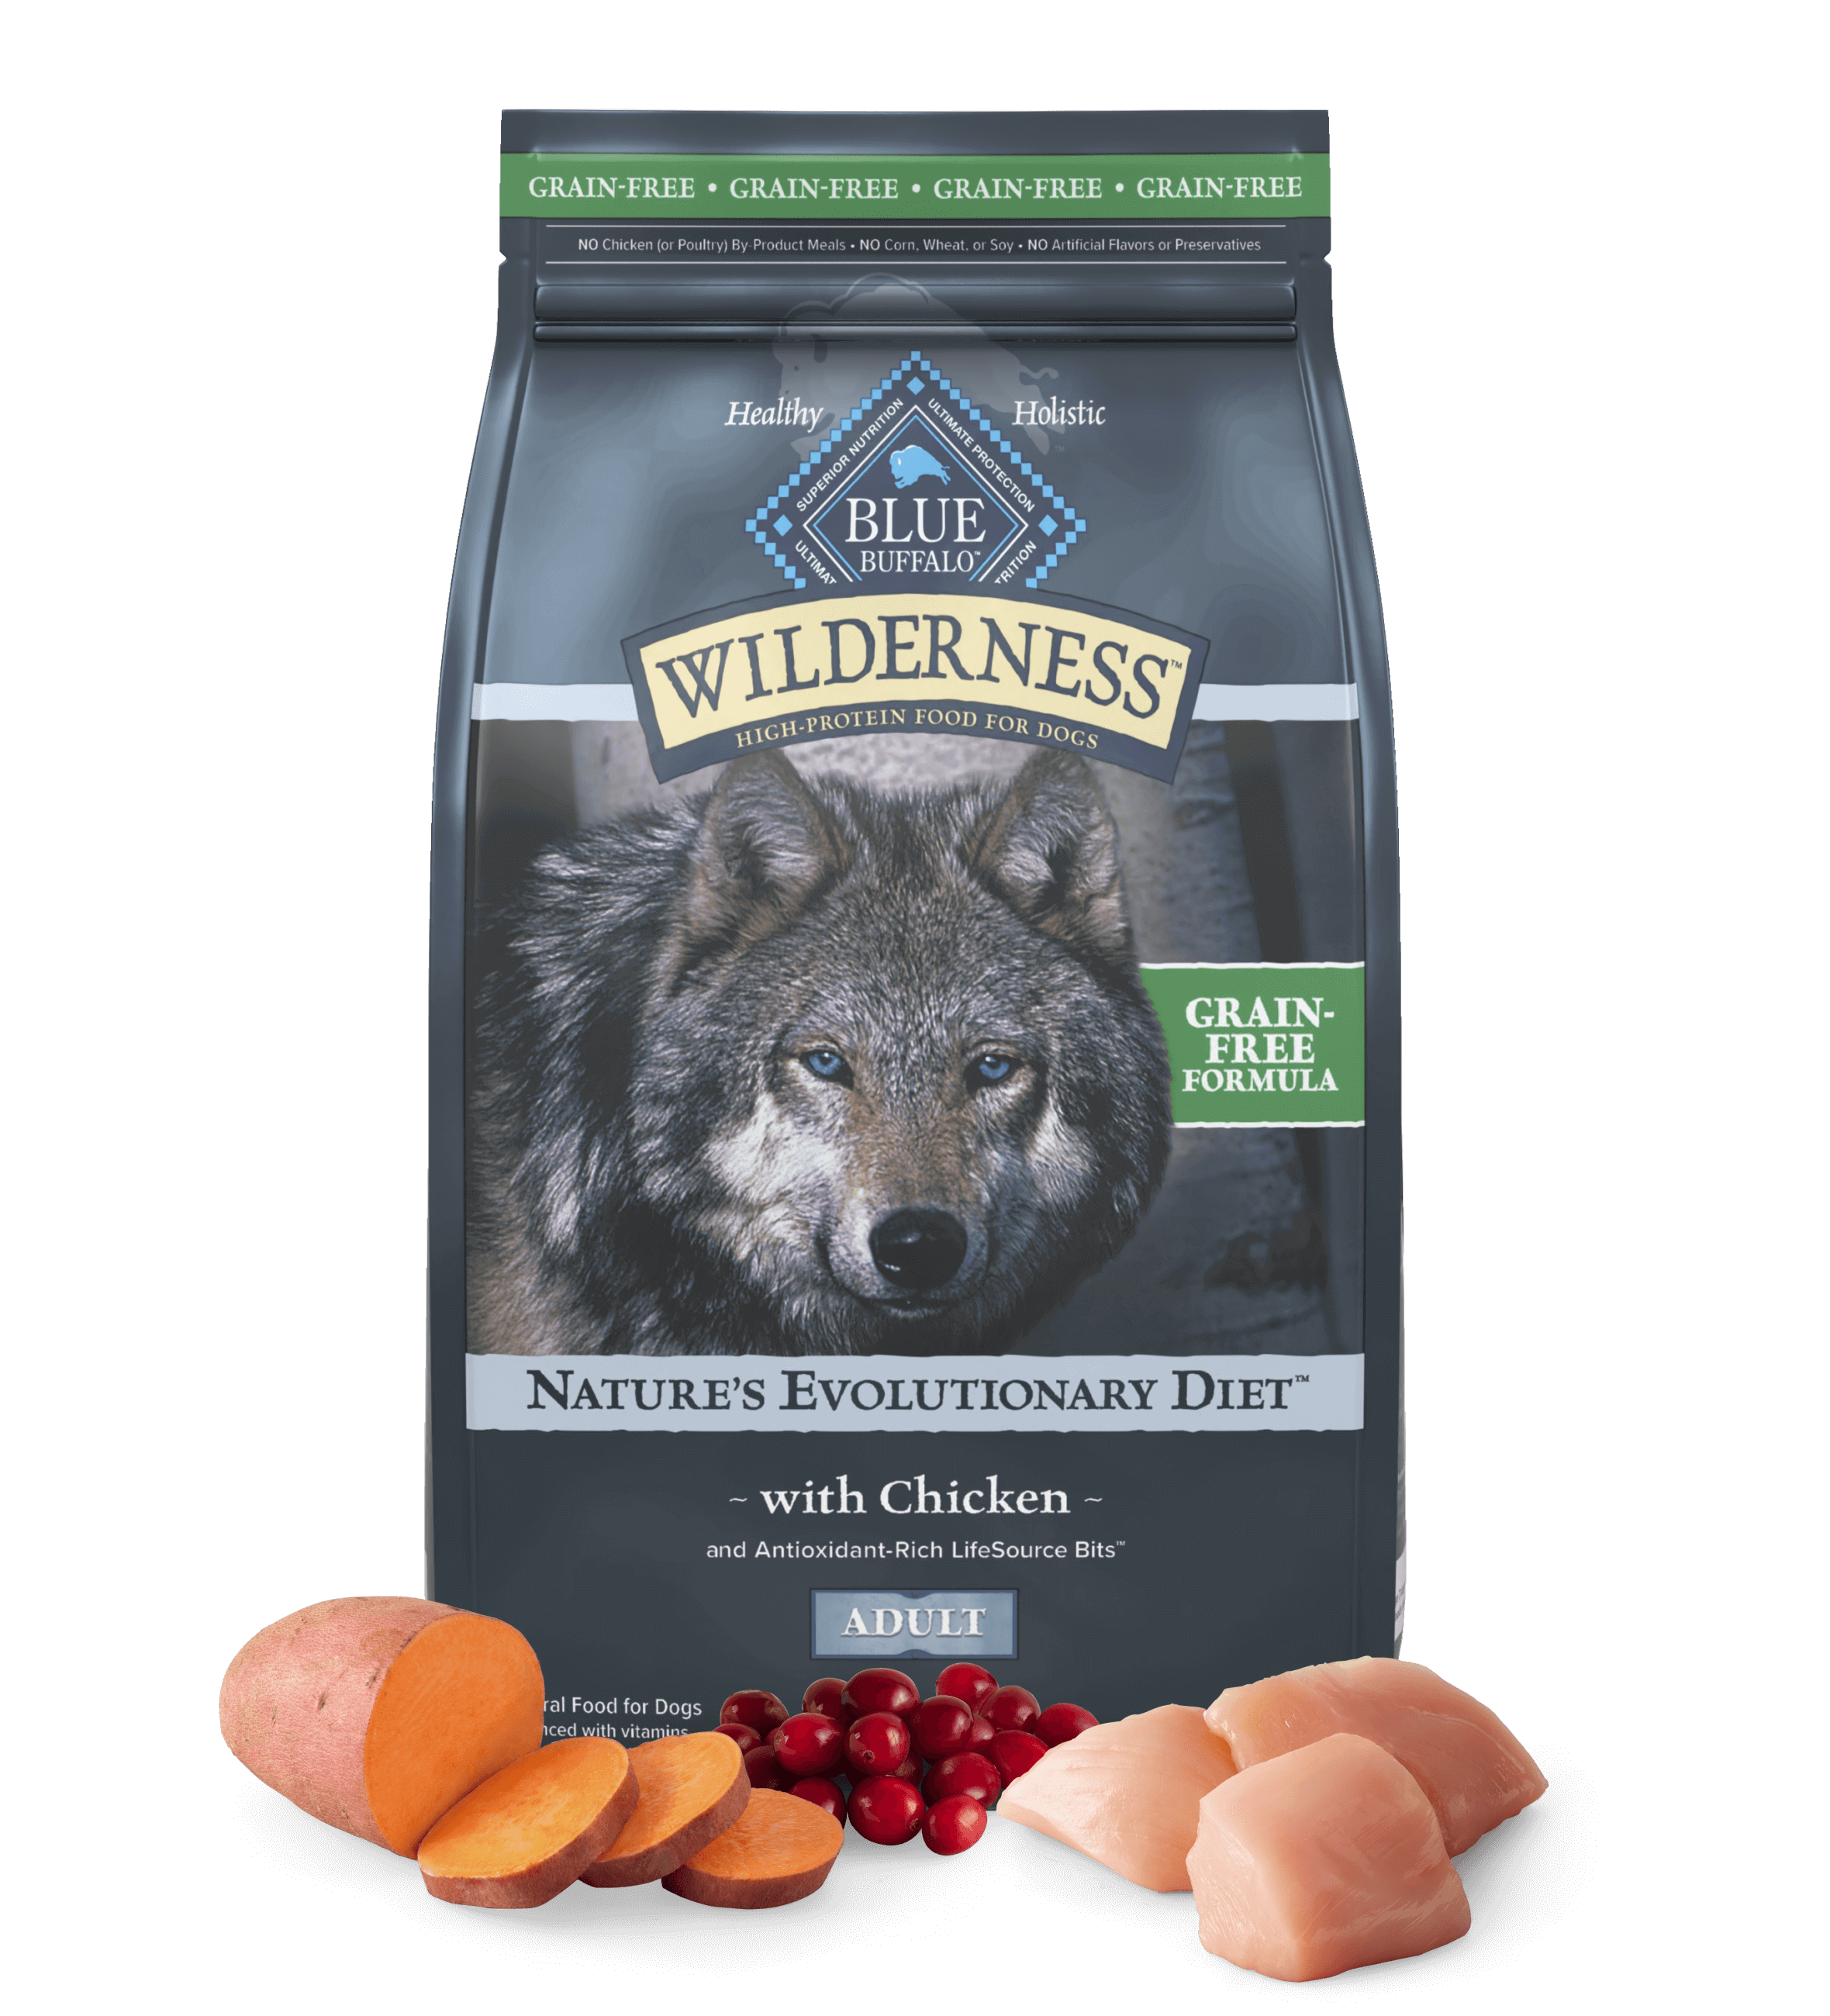 A bag of Wilderness Nature’s Evolutionary Diet with Chicken and LifeSource Bits Adult Dog – Grain-Free dog dry food